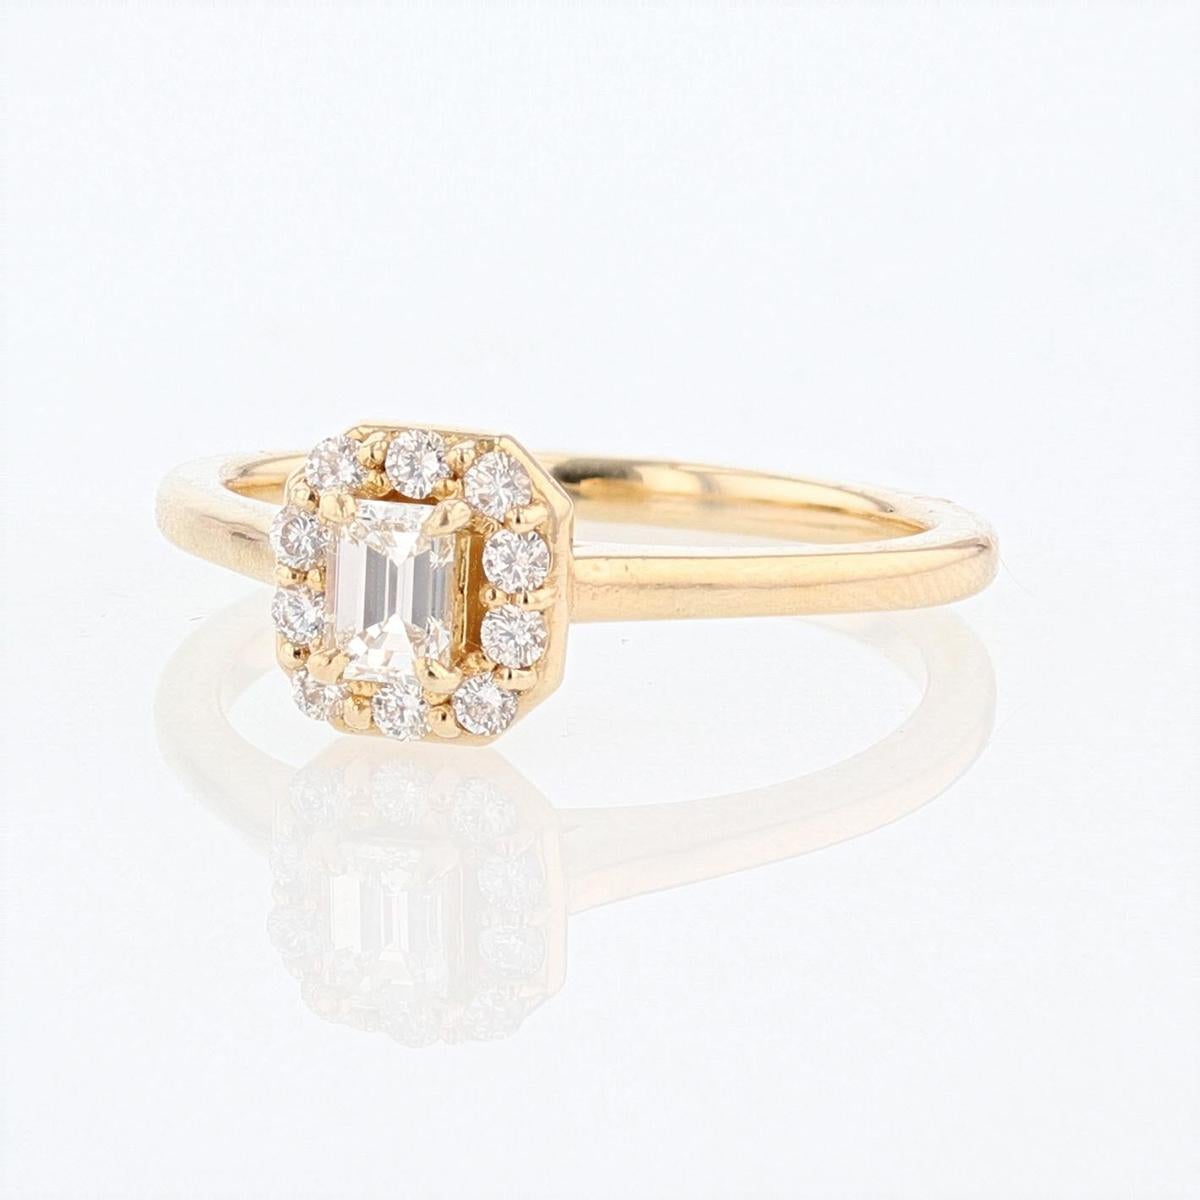 This diamond engagement ring is made with 14 karat yellow gold and features 1 prong set emerald cut diamond weighing 0.28cts and 10 prong set round diamonds weighing 0.19cts with a color grade (I) and clarity grade (SI2). 